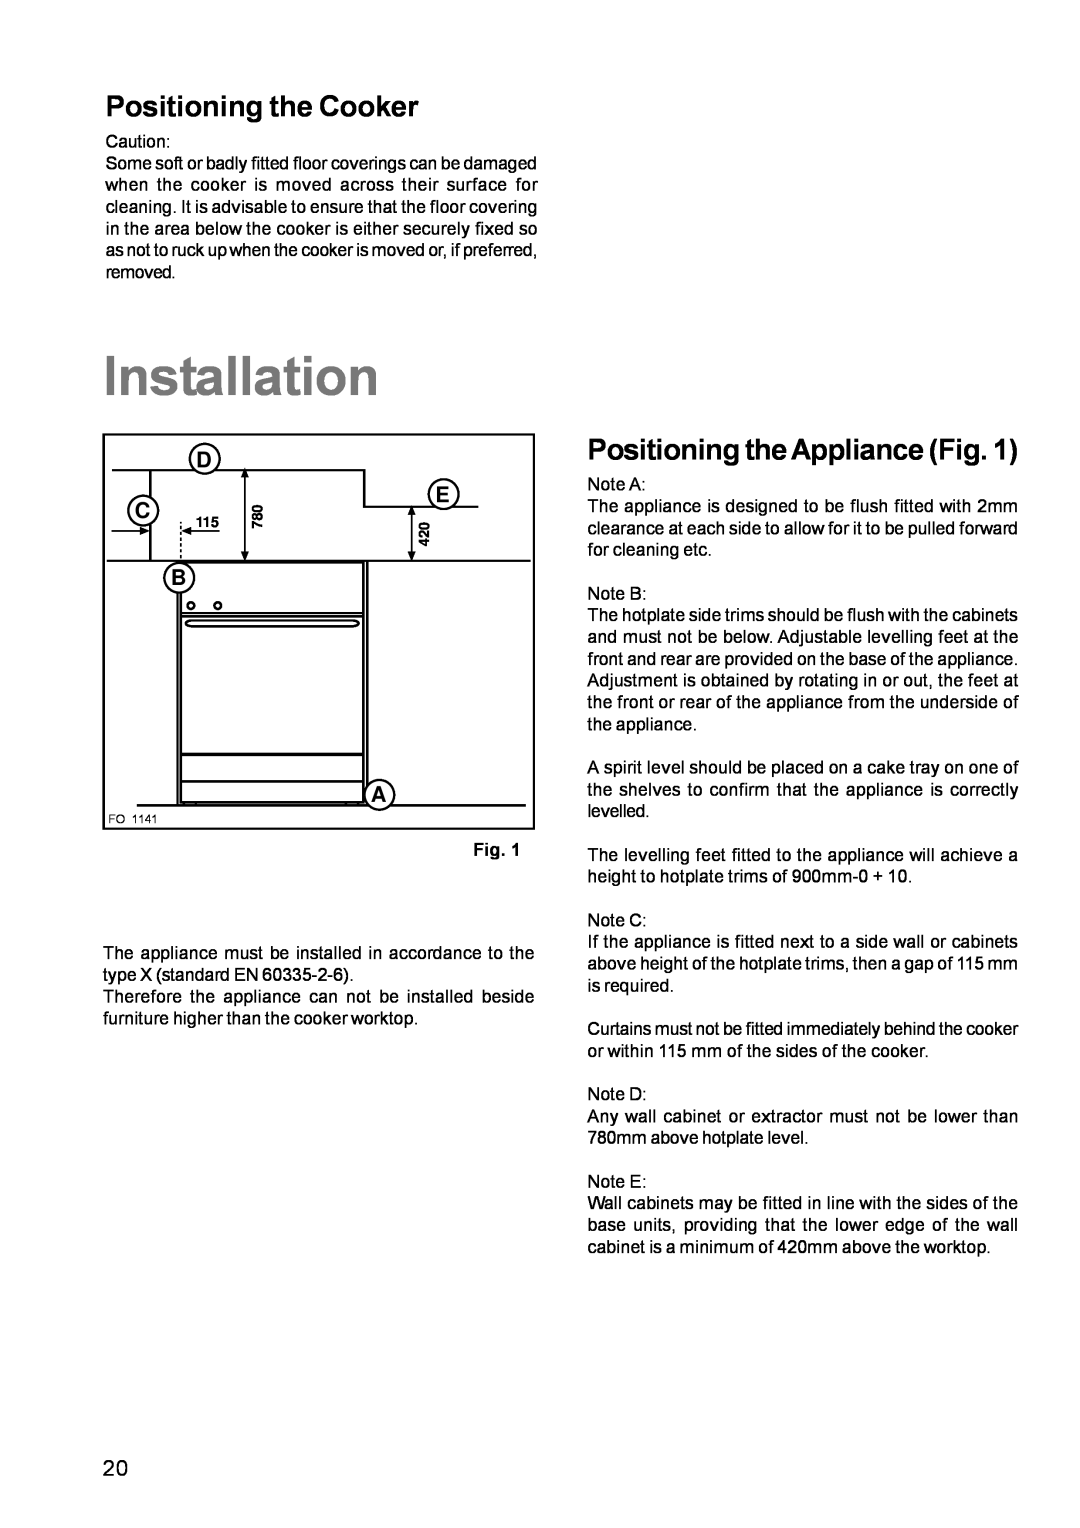 Zanussi ZCM 611 manual Positioning the Cooker, Positioning the Appliance Fig, Installation 